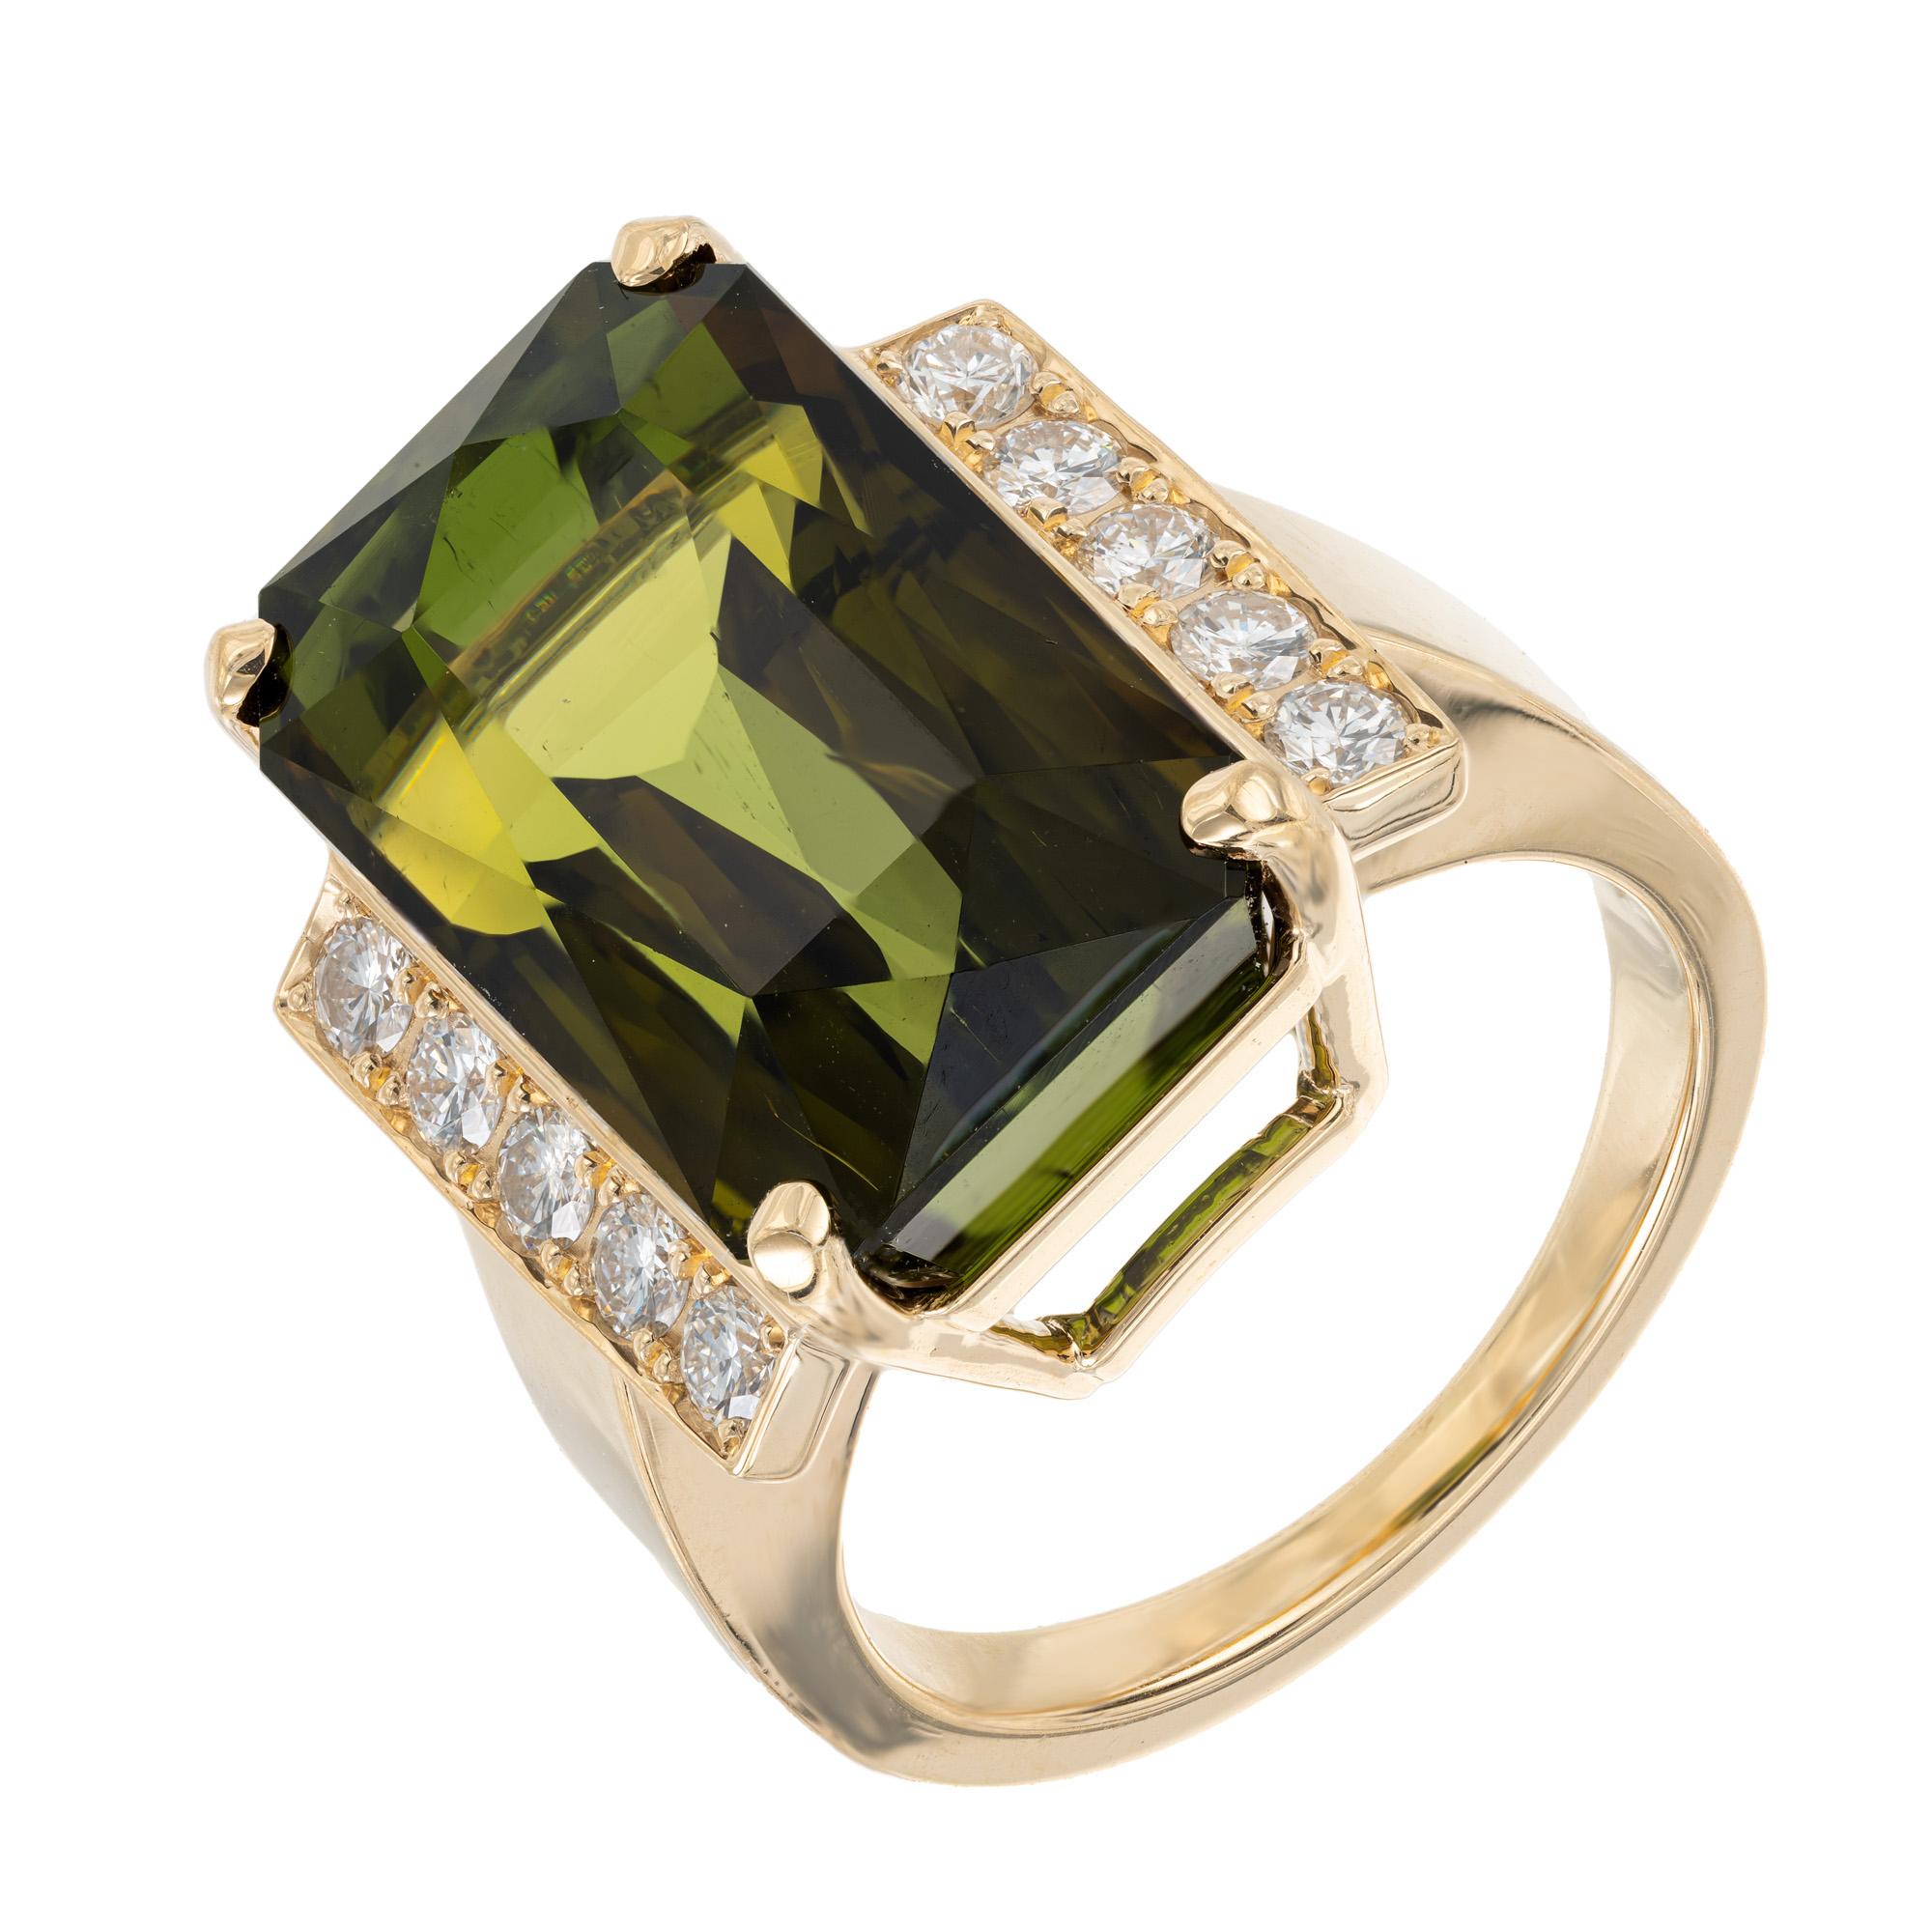 Stunning rare green tourmaline and diamond cocktail ring. This spectacular 17.44ct. octagonal tourmaline has a 3D green coloring accented with a yellowish and almost slight peach coloring across the middle. Truly unique. It is mounted in a 18k